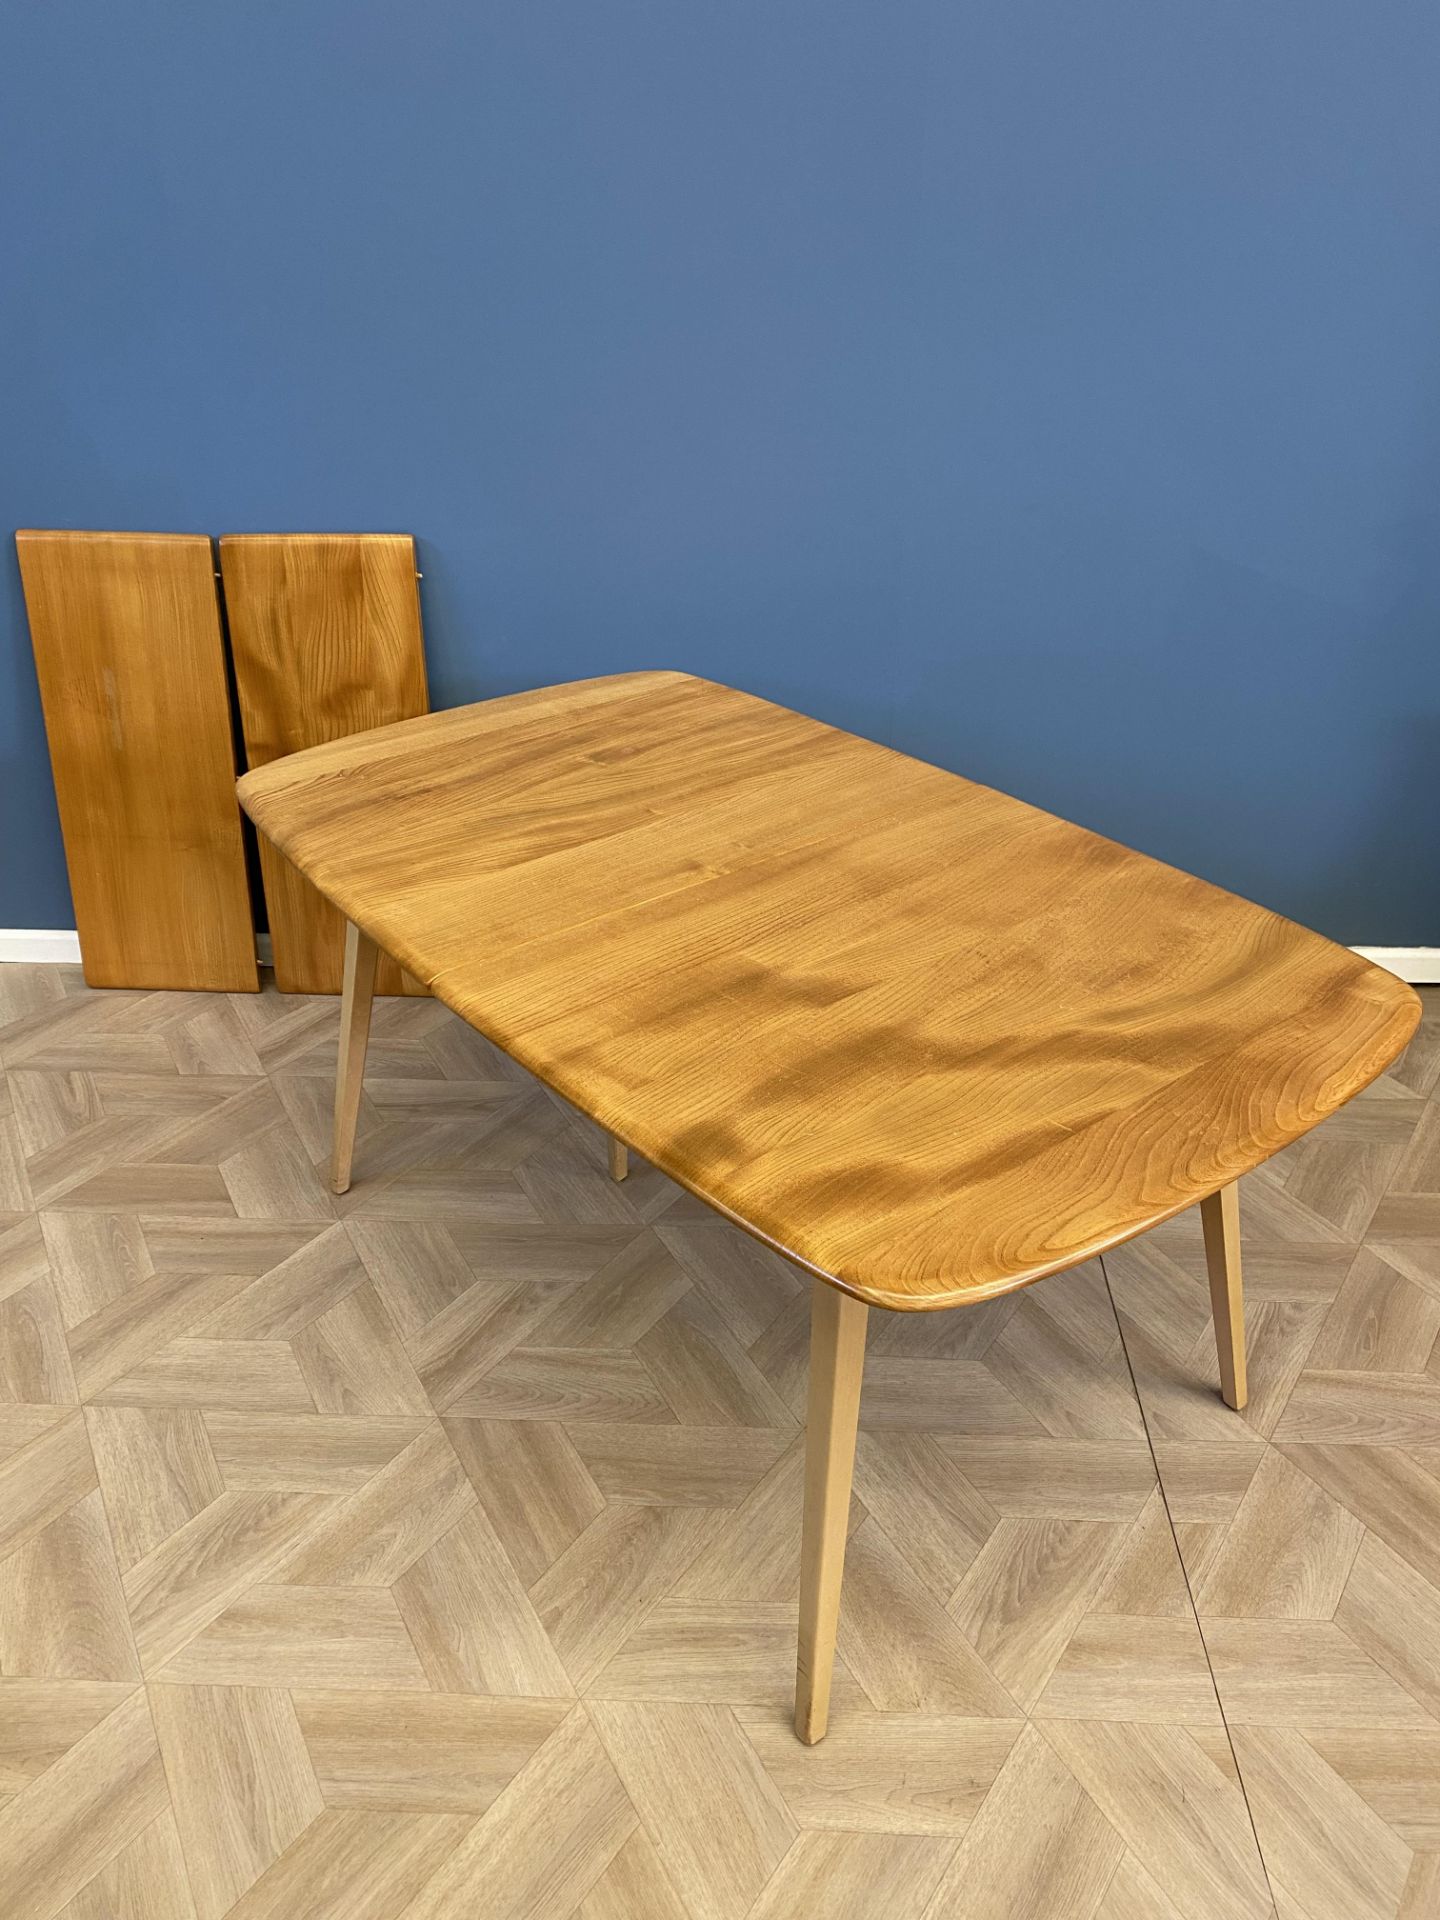 Ercol extending dining table - Image 4 of 9